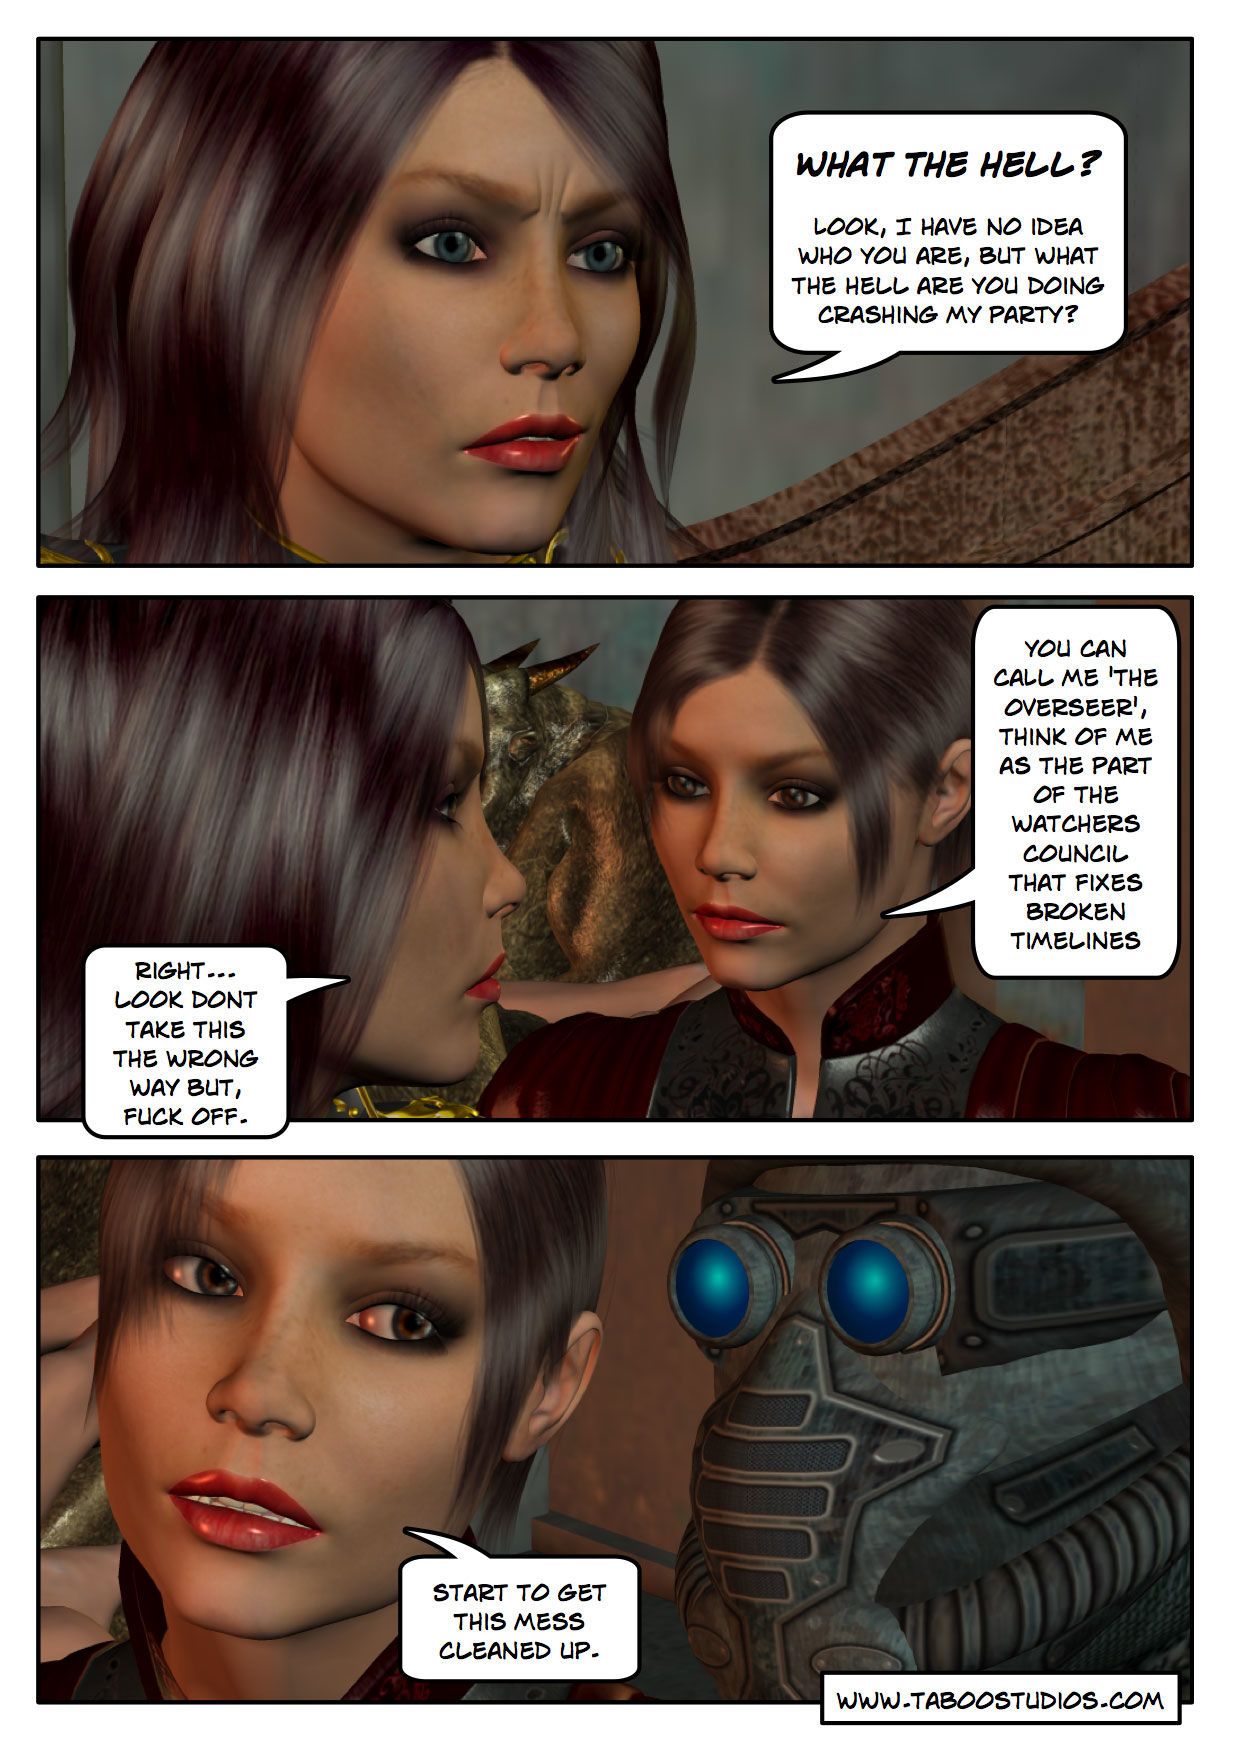 Slayer Issue 17 - part 3